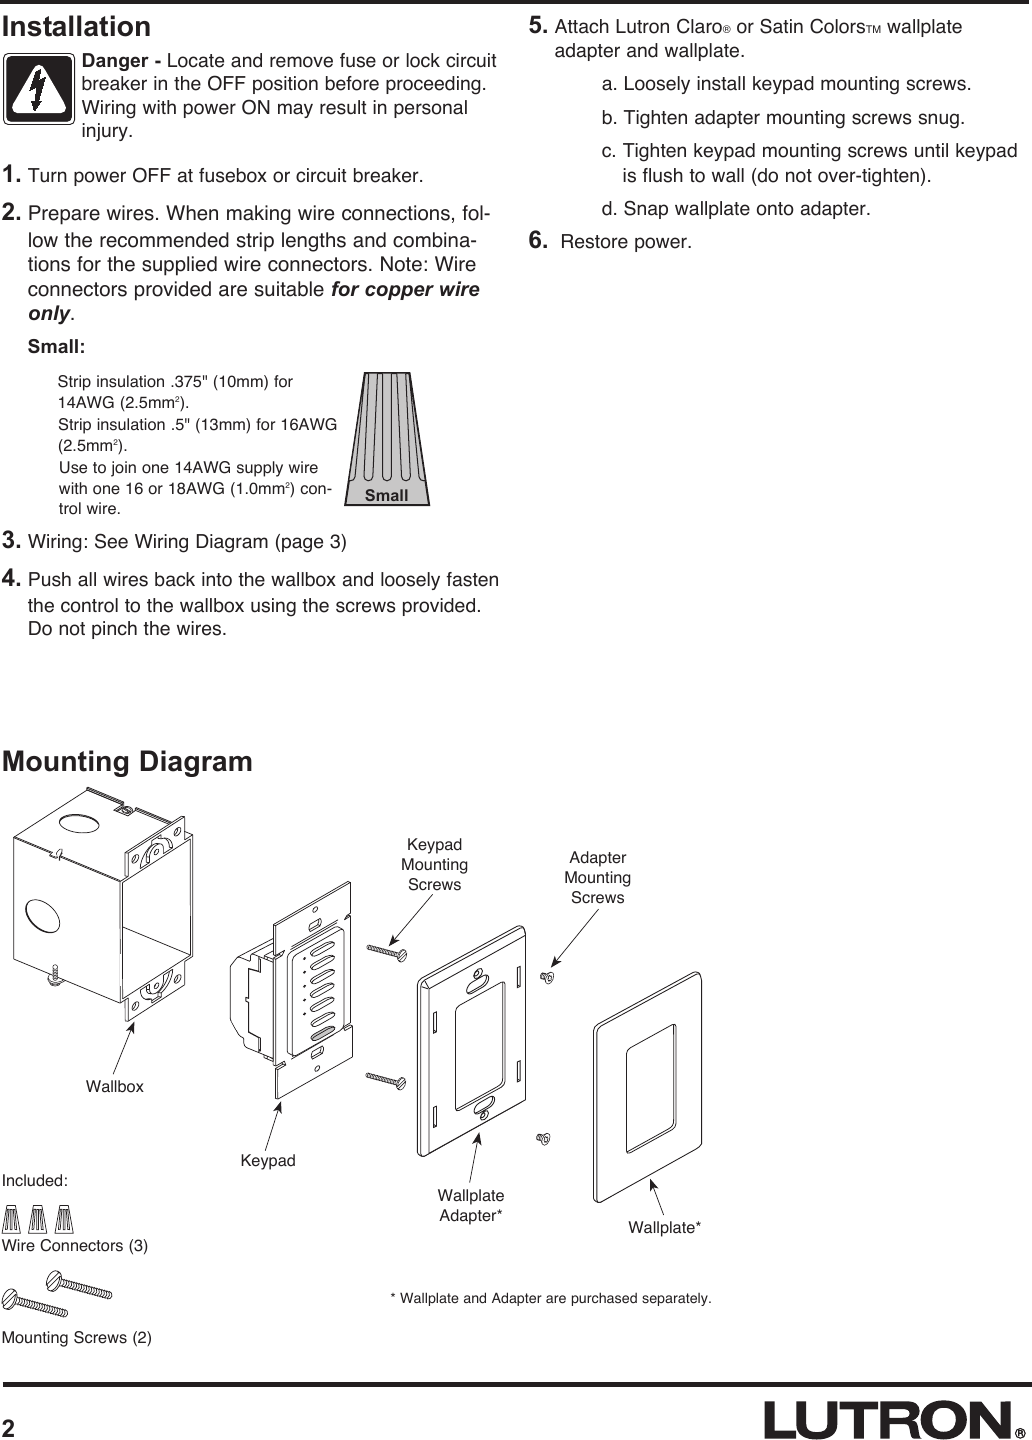 Mounting DiagramWallboxWallplateAdapter* Wallplate*KeypadMountingScrewsKeypadAdapterMountingScrews2* Wallplate and Adapter are purchased separately.1. Turn power OFF at fusebox or circuit breaker.2. Prepare wires. When making wire connections, fol-low the recommended strip lengths and combina-tions for the supplied wire connectors. Note: Wireconnectors provided are suitable for copper wireonly. Small: Strip insulation .375&quot; (10mm) for14AWG (2.5mm2). Strip insulation .5&quot; (13mm) for 16AWG(2.5mm2).Use to join one 14AWG supply wirewith one 16 or 18AWG (1.0mm2) con-trol wire.3. Wiring: See Wiring Diagram (page 3)4. Push all wires back into the wallbox and loosely fastenthe control to the wallbox using the screws provided.Do not pinch the wires.5. Attach Lutron Claro®or Satin ColorsTM wallplateadapter and wallplate. a. Loosely install keypad mounting screws.b. Tighten adapter mounting screws snug.c. Tighten keypad mounting screws until keypadis flush to wall (do not over-tighten).d. Snap wallplate onto adapter.6. Restore power.Included:Wire Connectors (3)Mounting Screws (2)InstallationDanger - Locate and remove fuse or lock circuitbreaker in the OFF position before proceeding.Wiring with power ON may result in personalinjury.Small